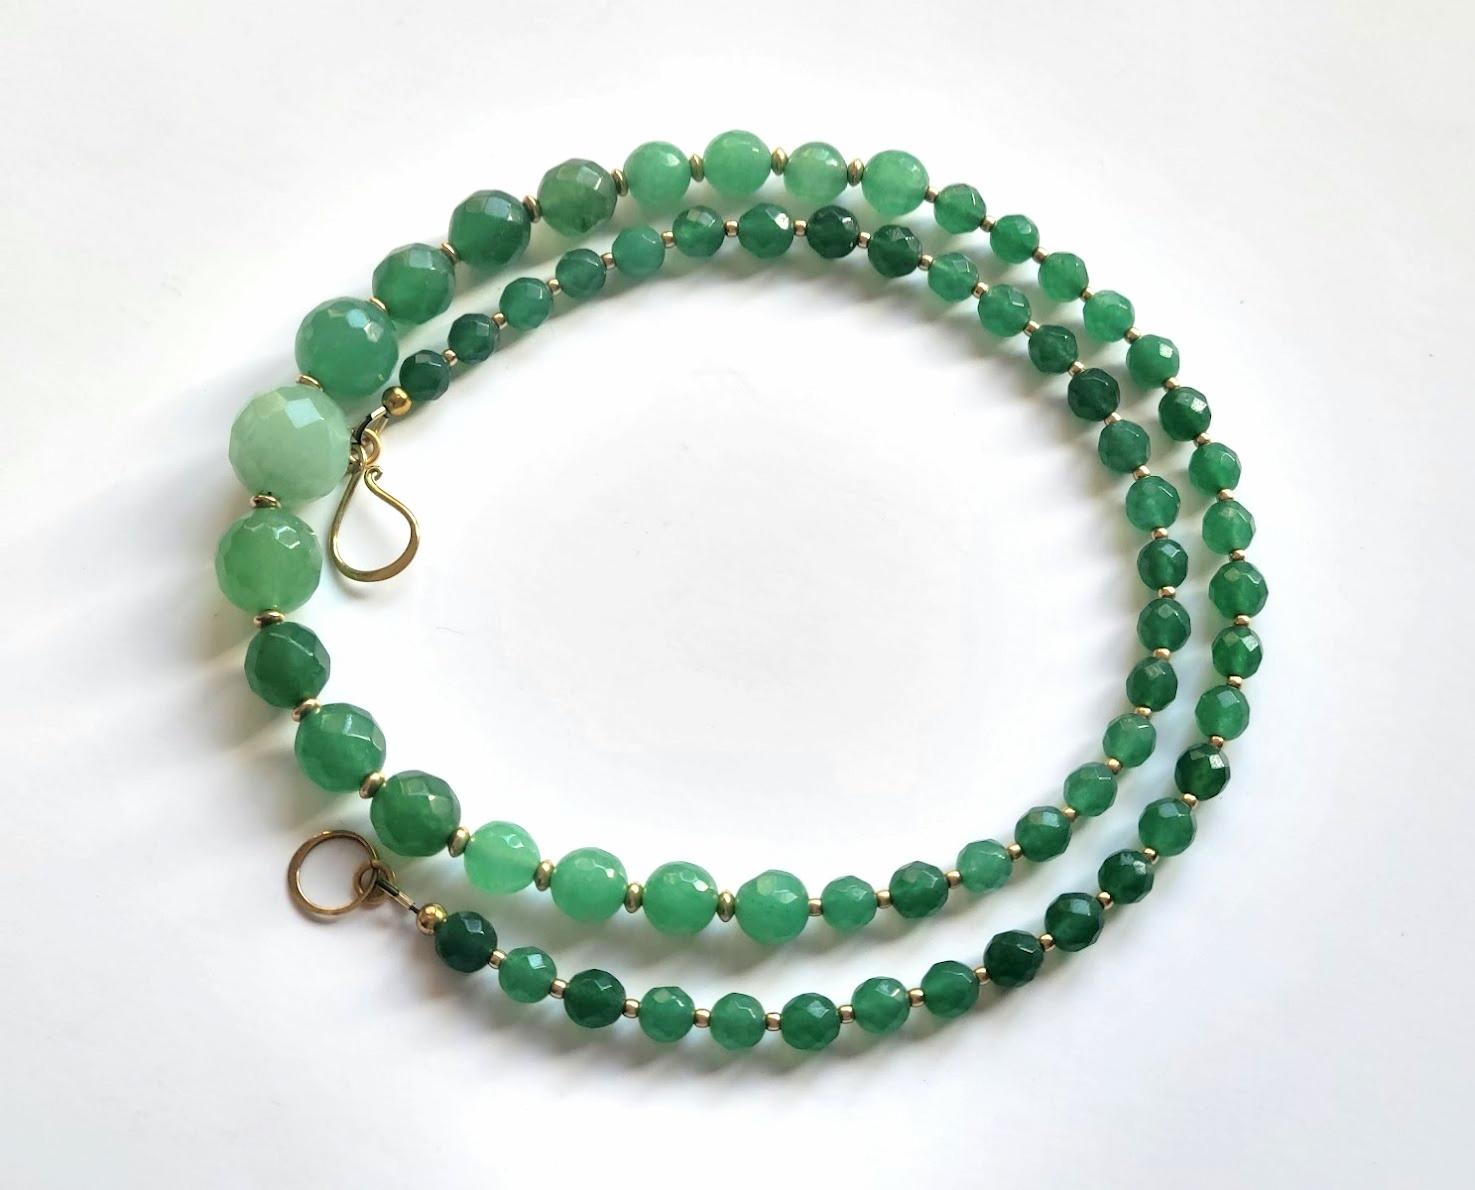 The length of the necklace is 23 inches (58.4 cm). The size of the beads varies from 6 mm to 13 mm.
The color of the faceted beads is vibrant, saturated, apple green, semi-transparent, and emerald green.
Each bead was cut, faceted, and polished by